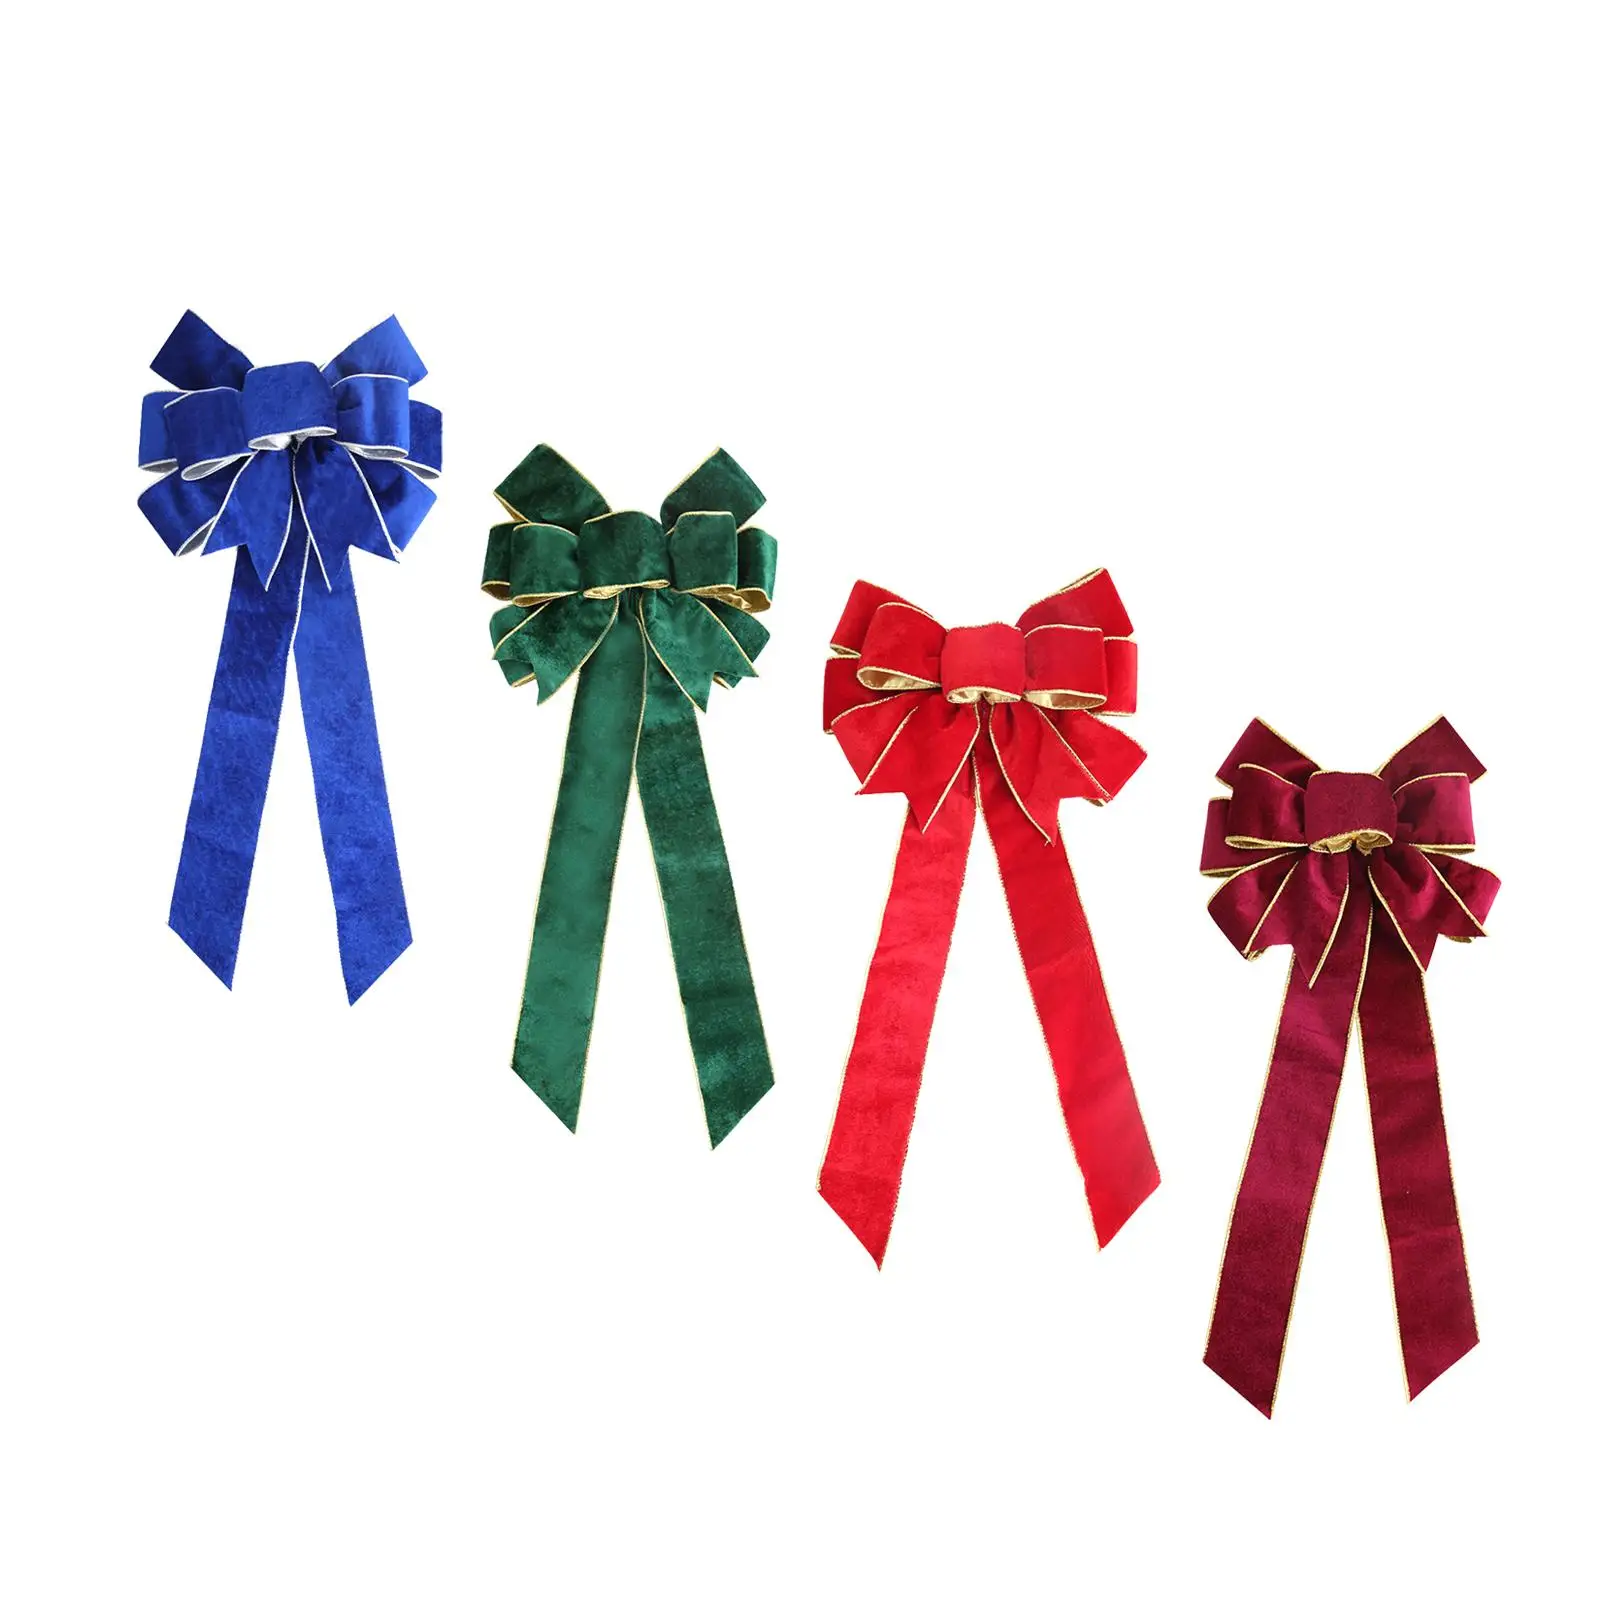 Festive Ribbon Bow for Christmas Decor - Perfect for Backyard Scene Layout and Holiday Party Accessories